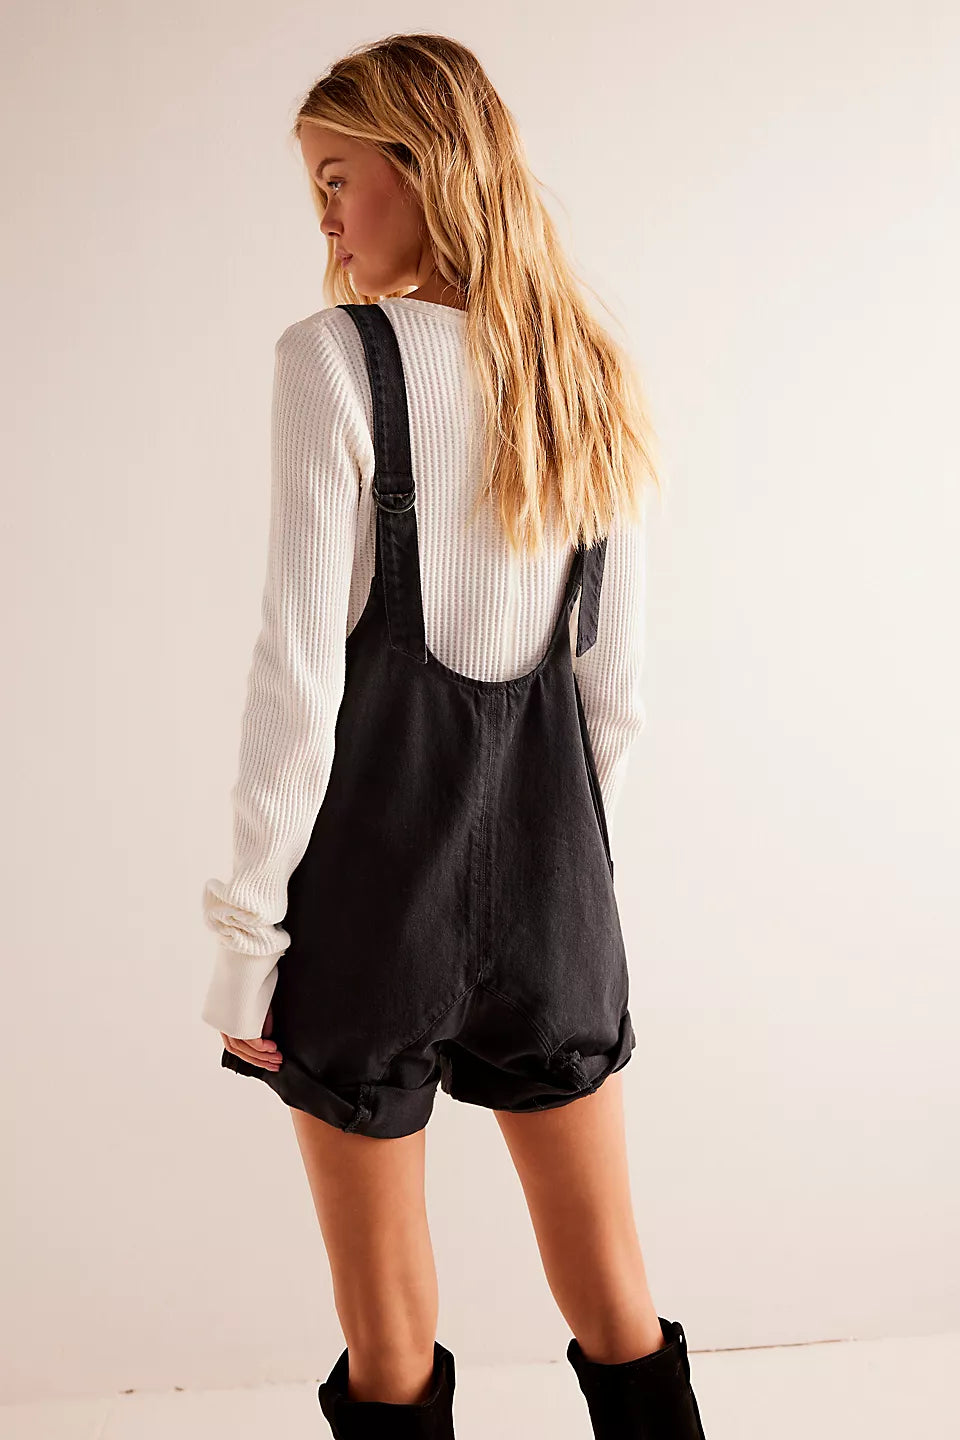 Free People We The Free High Roller Shortall - True North - Sun Diego Boardshop